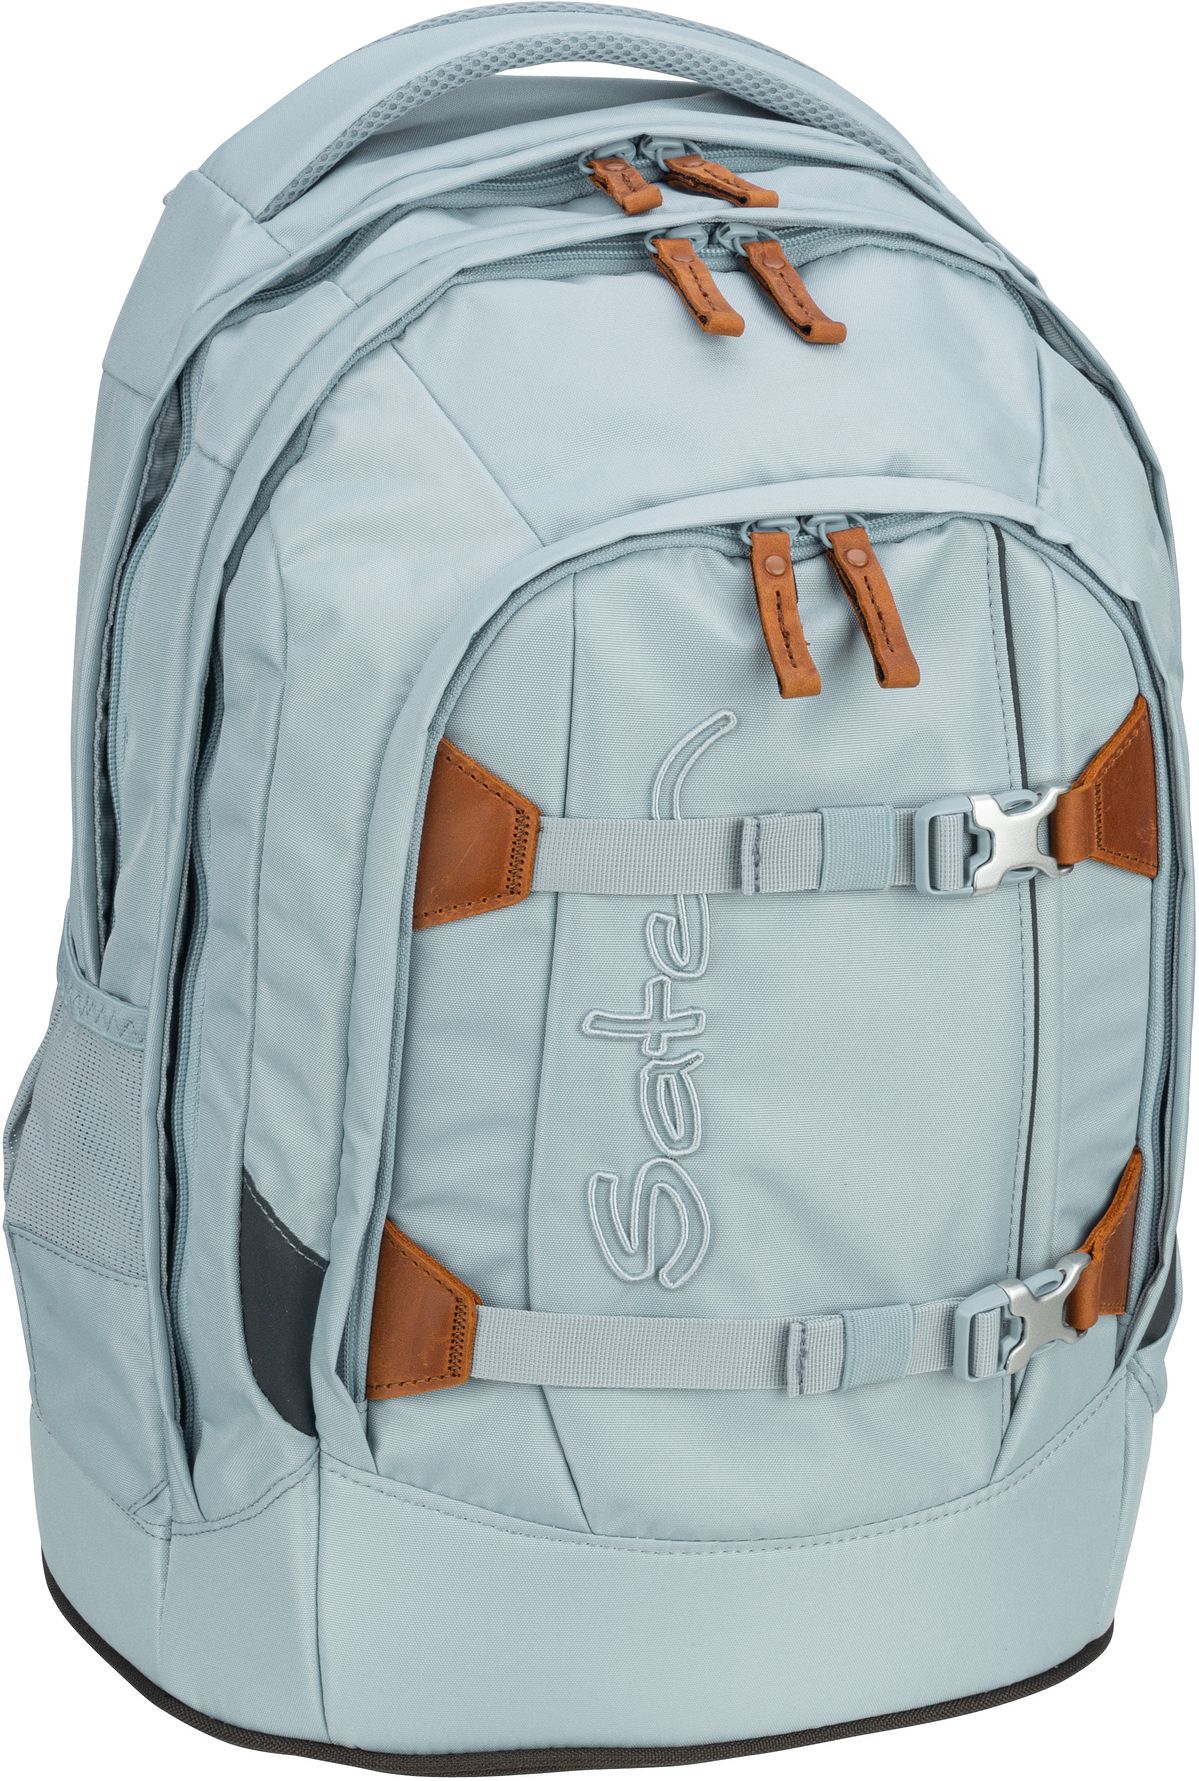 satch satch pack Nordic Edition - Nordic Ice Blue